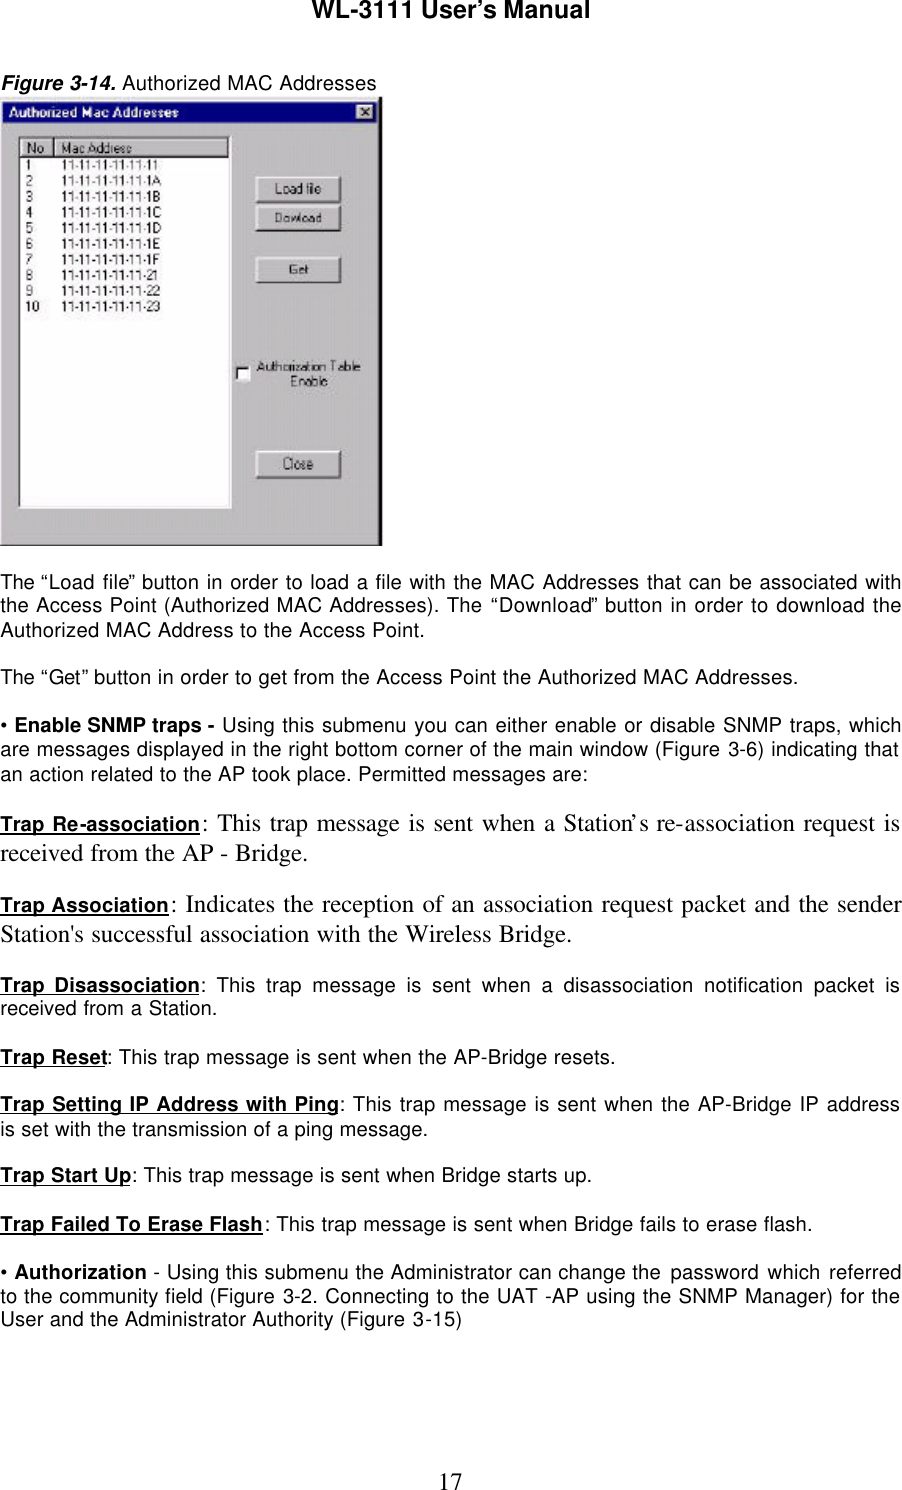 WL-3111 User’s Manual17Figure 3-14. Authorized MAC AddressesThe “Load file” button in order to load a file with the MAC Addresses that can be associated withthe Access Point (Authorized MAC Addresses). The “Download” button in order to download theAuthorized MAC Address to the Access Point.The “Get” button in order to get from the Access Point the Authorized MAC Addresses.• Enable SNMP traps - Using this submenu you can either enable or disable SNMP traps, whichare messages displayed in the right bottom corner of the main window (Figure 3-6) indicating thatan action related to the AP took place. Permitted messages are:Trap Re-association: This trap message is sent when a Station’s re-association request isreceived from the AP - Bridge.Trap Association: Indicates the reception of an association request packet and the senderStation&apos;s successful association with the Wireless Bridge.Trap Disassociation: This trap message is sent when a disassociation notification packet isreceived from a Station.Trap Reset: This trap message is sent when the AP-Bridge resets.Trap Setting IP Address with Ping: This trap message is sent when the AP-Bridge IP addressis set with the transmission of a ping message.Trap Start Up: This trap message is sent when Bridge starts up.Trap Failed To Erase Flash: This trap message is sent when Bridge fails to erase flash.• Authorization - Using this submenu the Administrator can change the password which referredto the community field (Figure 3-2. Connecting to the UAT -AP using the SNMP Manager) for theUser and the Administrator Authority (Figure 3-15)